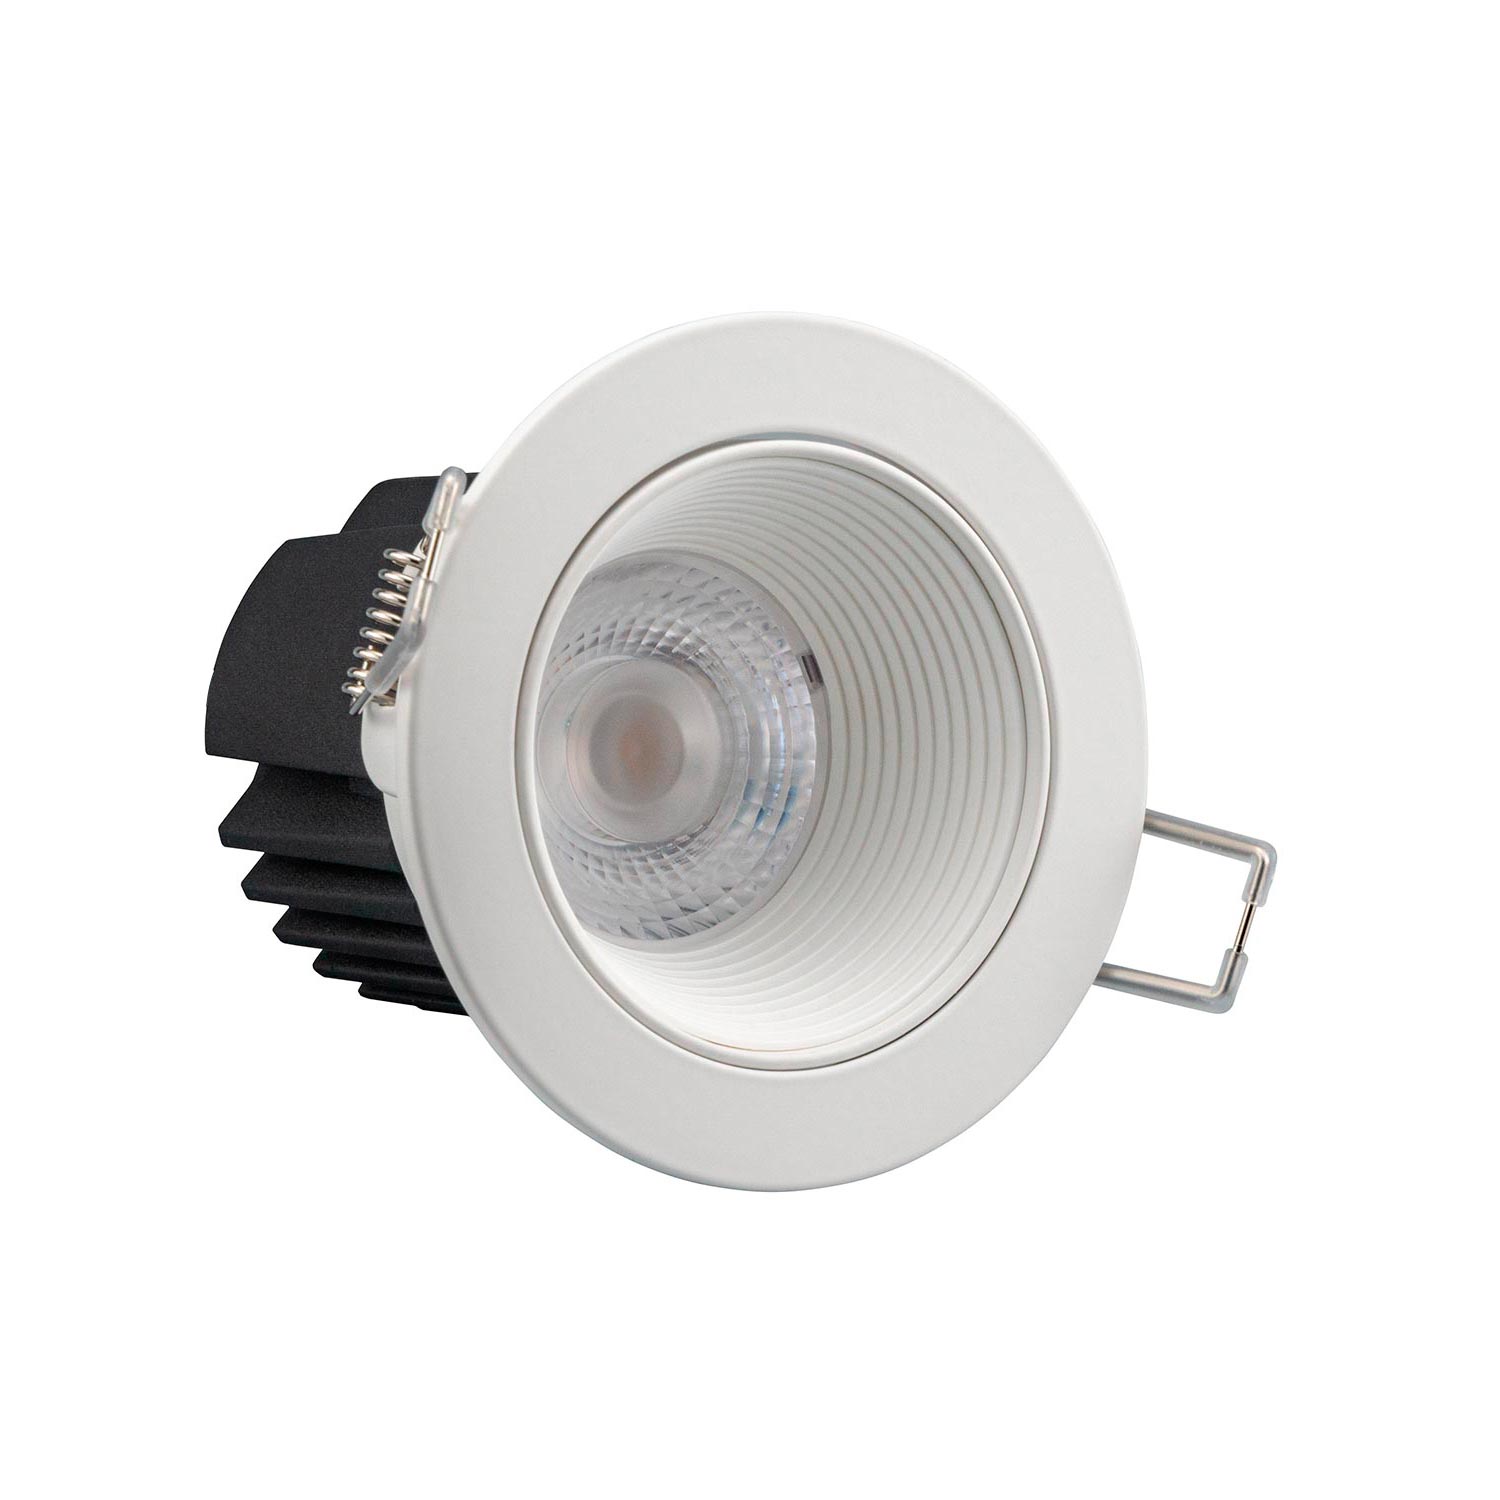 Foco LED 7W orientable circular ROTERE ROUND ø75mm blanco